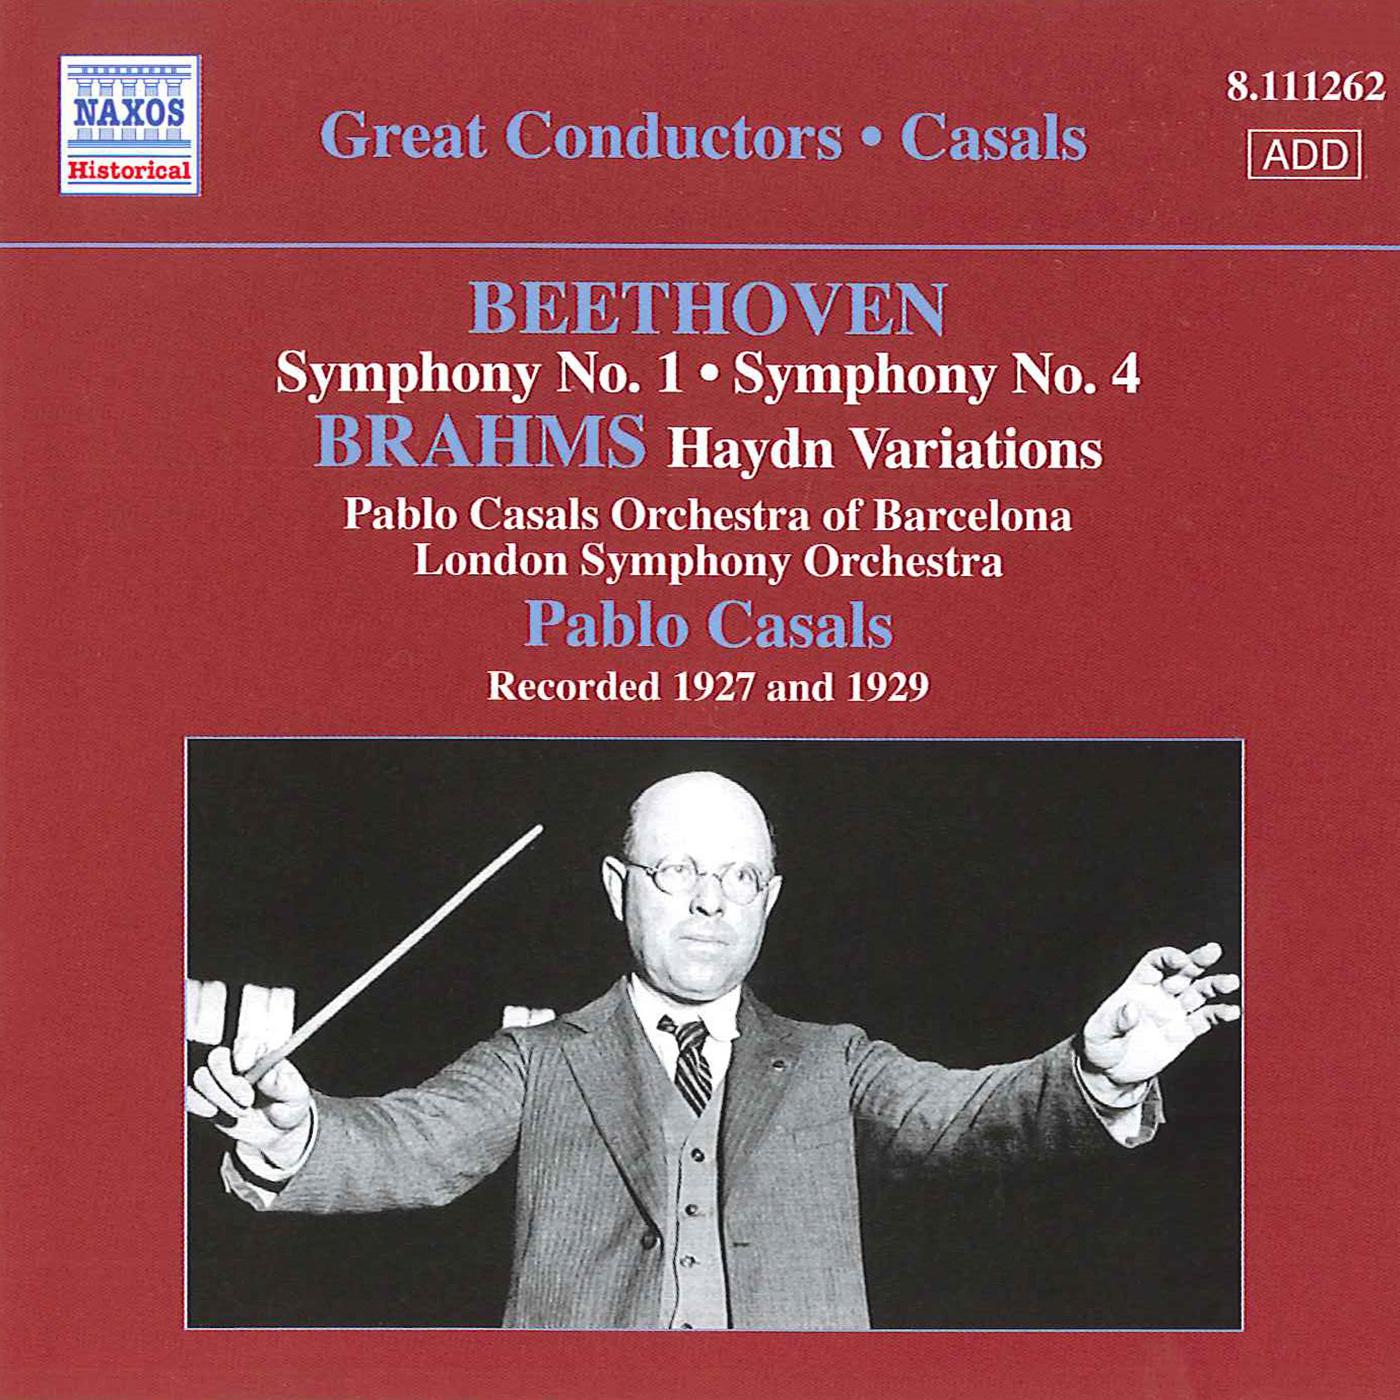 Variations on a Theme by Haydn, Op. 56a, " St. Anthony Variations": Variation 1: Poco piu animato